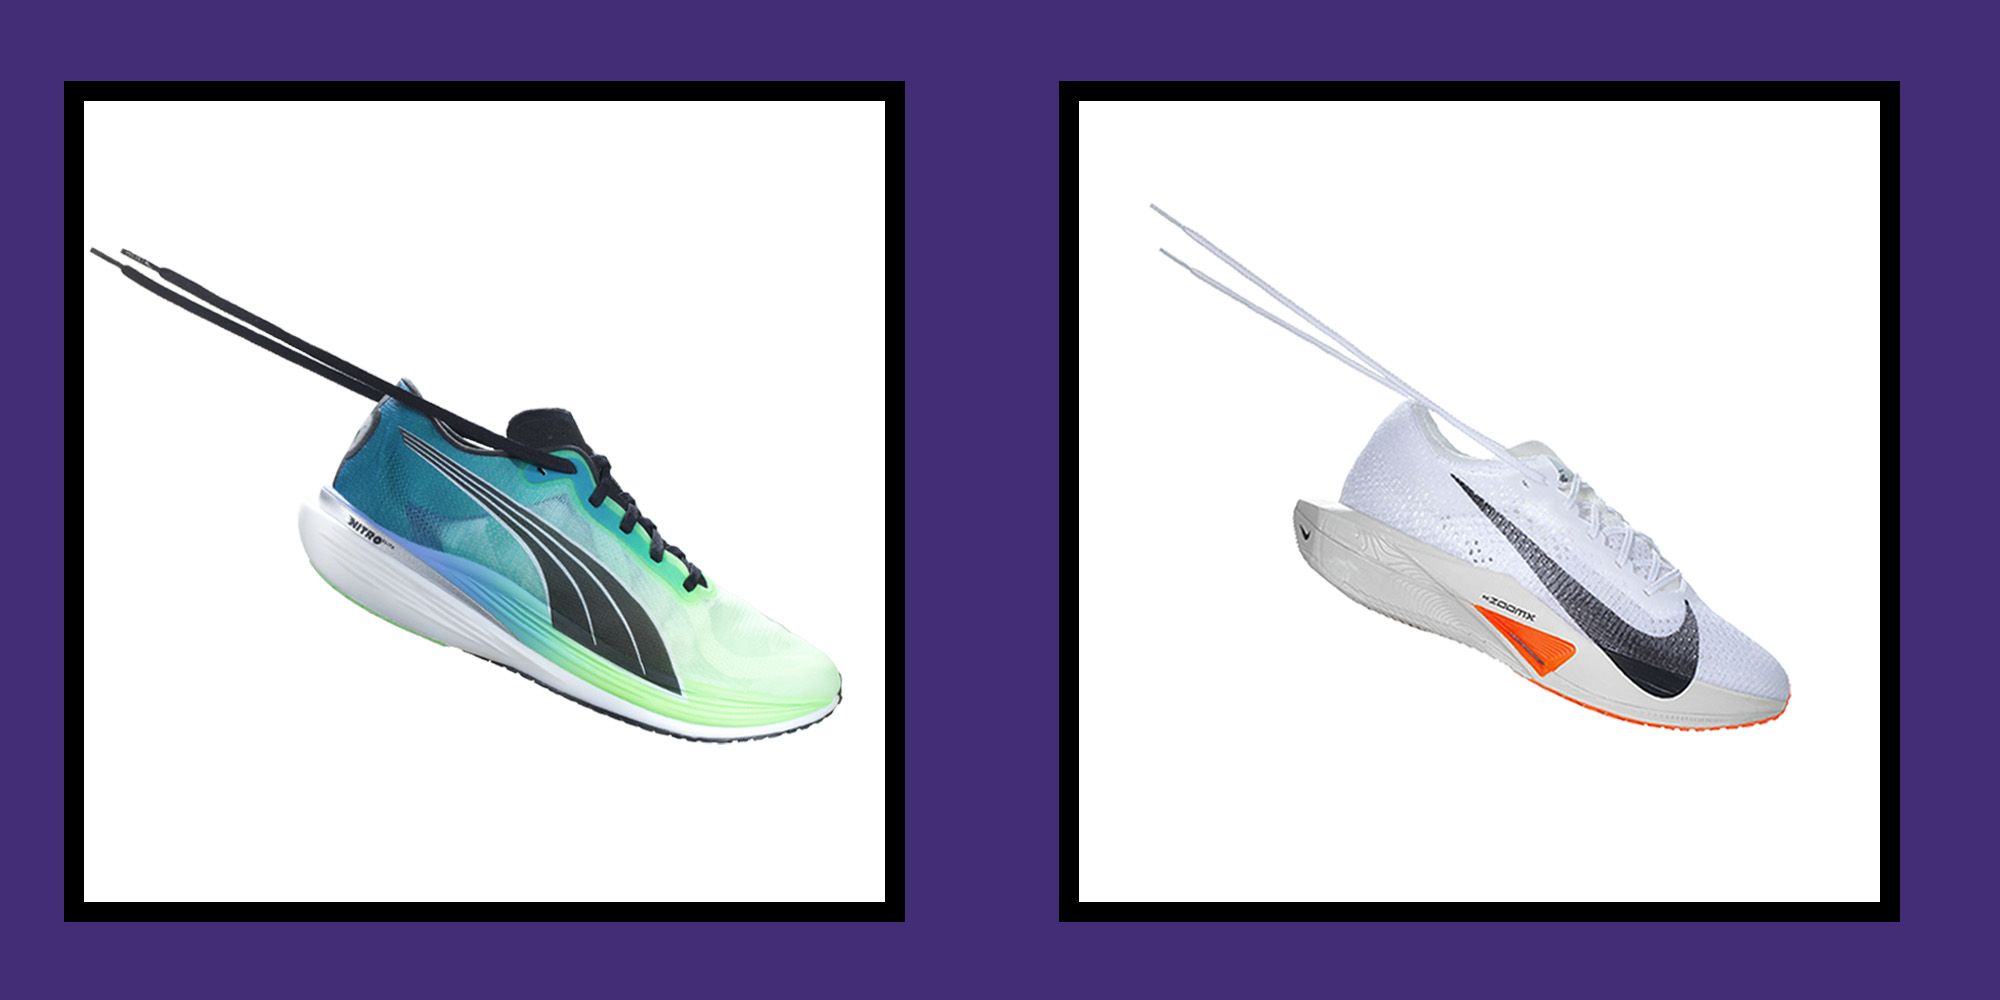 Check out these cheap high jump spikes from HEALTH.